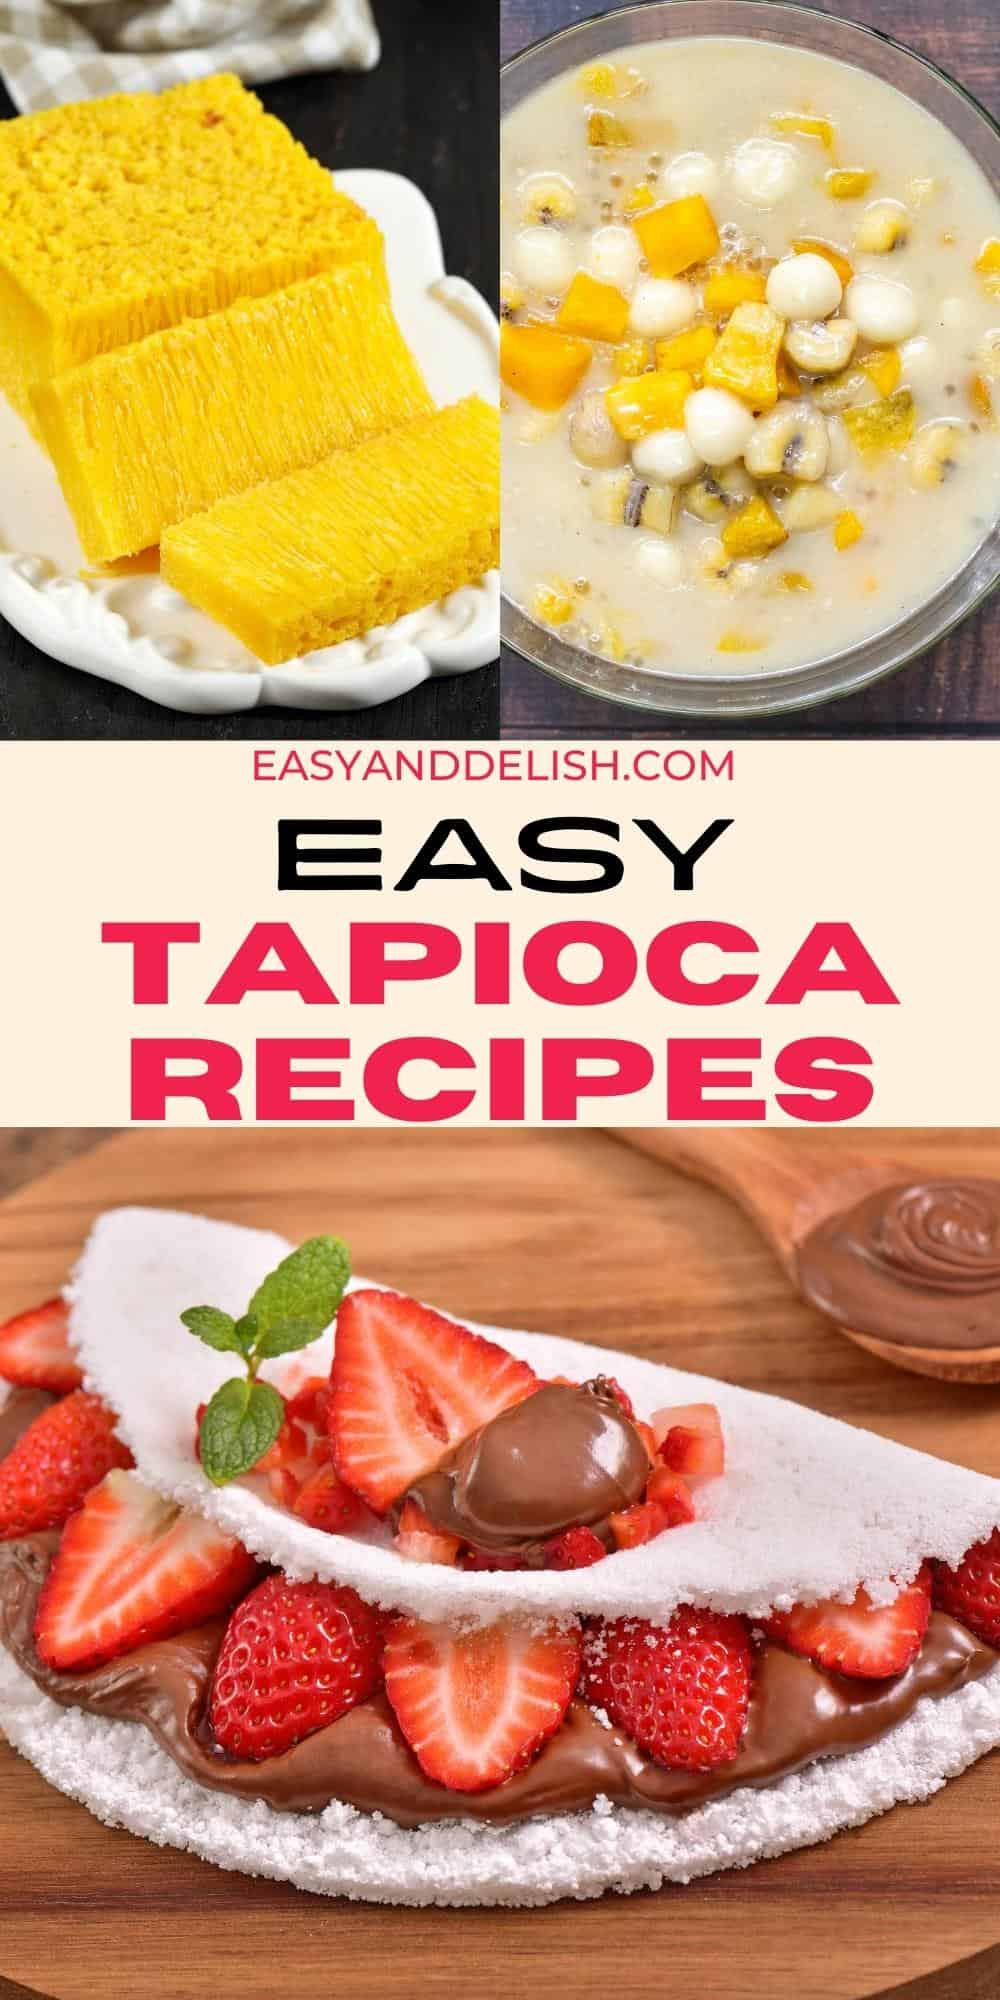 photo collage showing some tapioca recipes from different countries